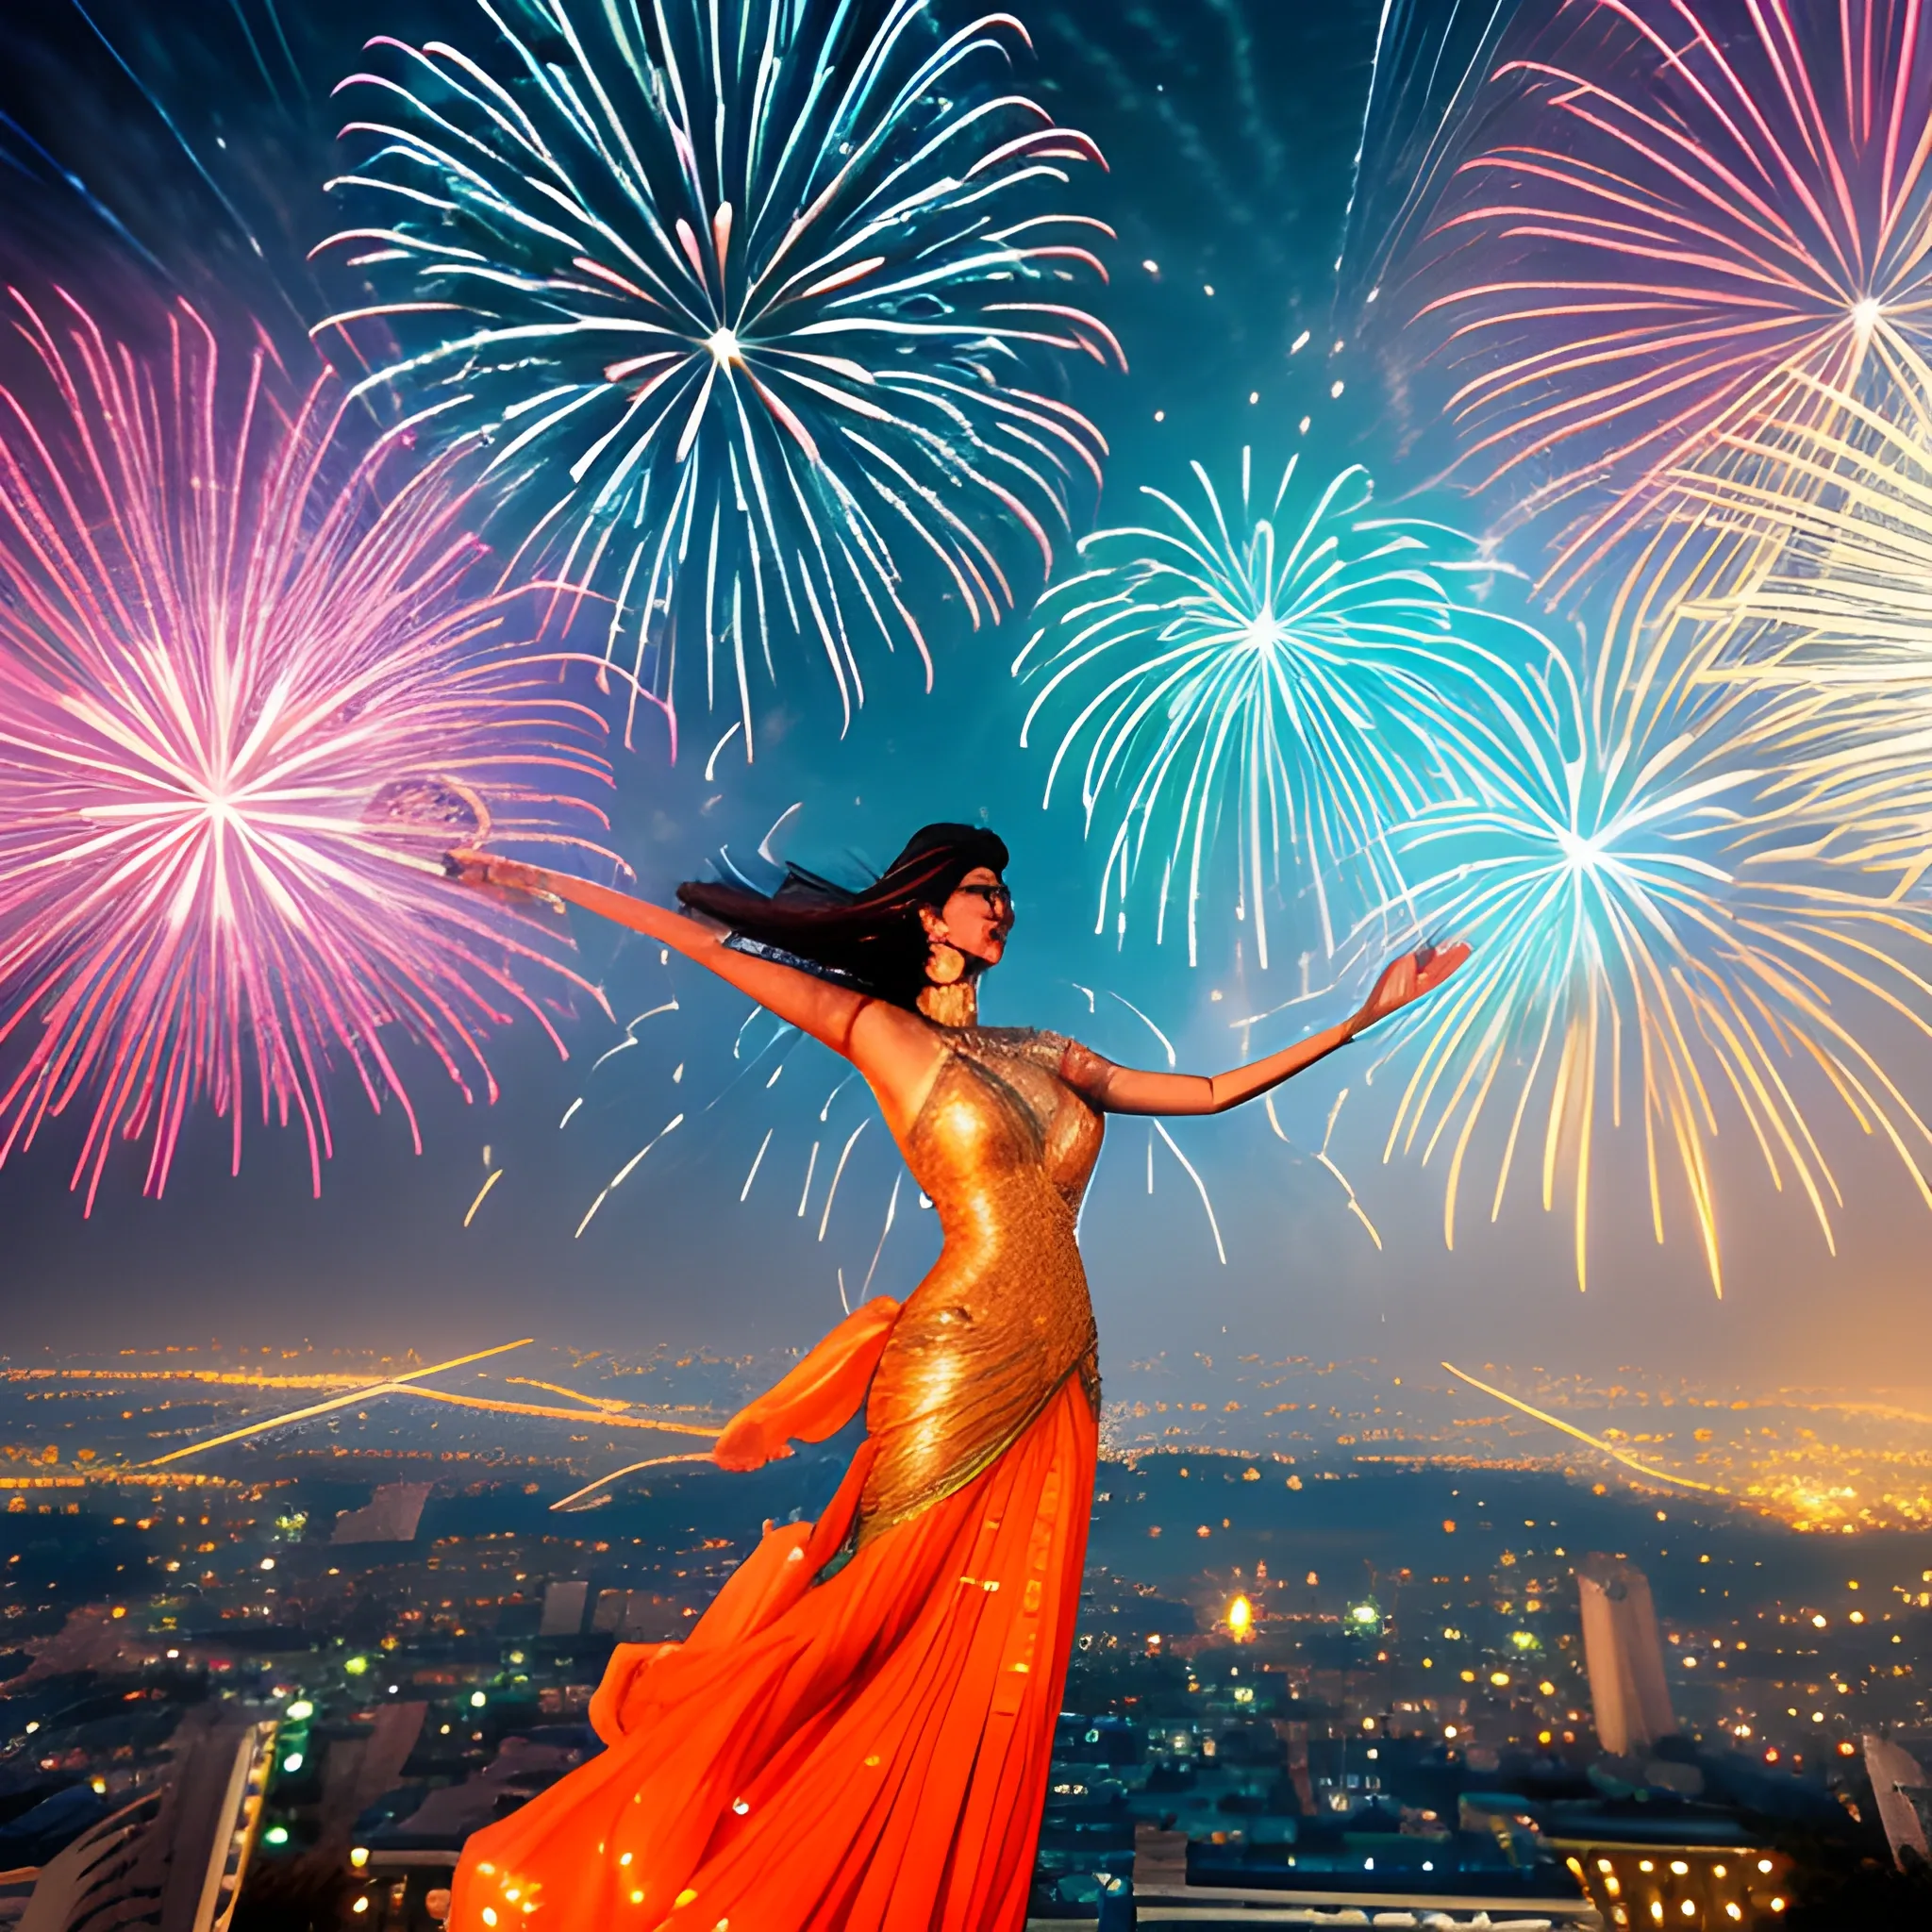 Glowing lights over Indian city, a Indian girl in weightlessness, a dress is developing, the wind, sparkles, and fantasy elements jarbres on her neck, the light of soloists, multicolored fireworks around, bokeh,sparkling, splendid, colorful, magical photography, dramatic lighting, photo realism, ultra - detailed, 4k, Depth of field, High - resolution